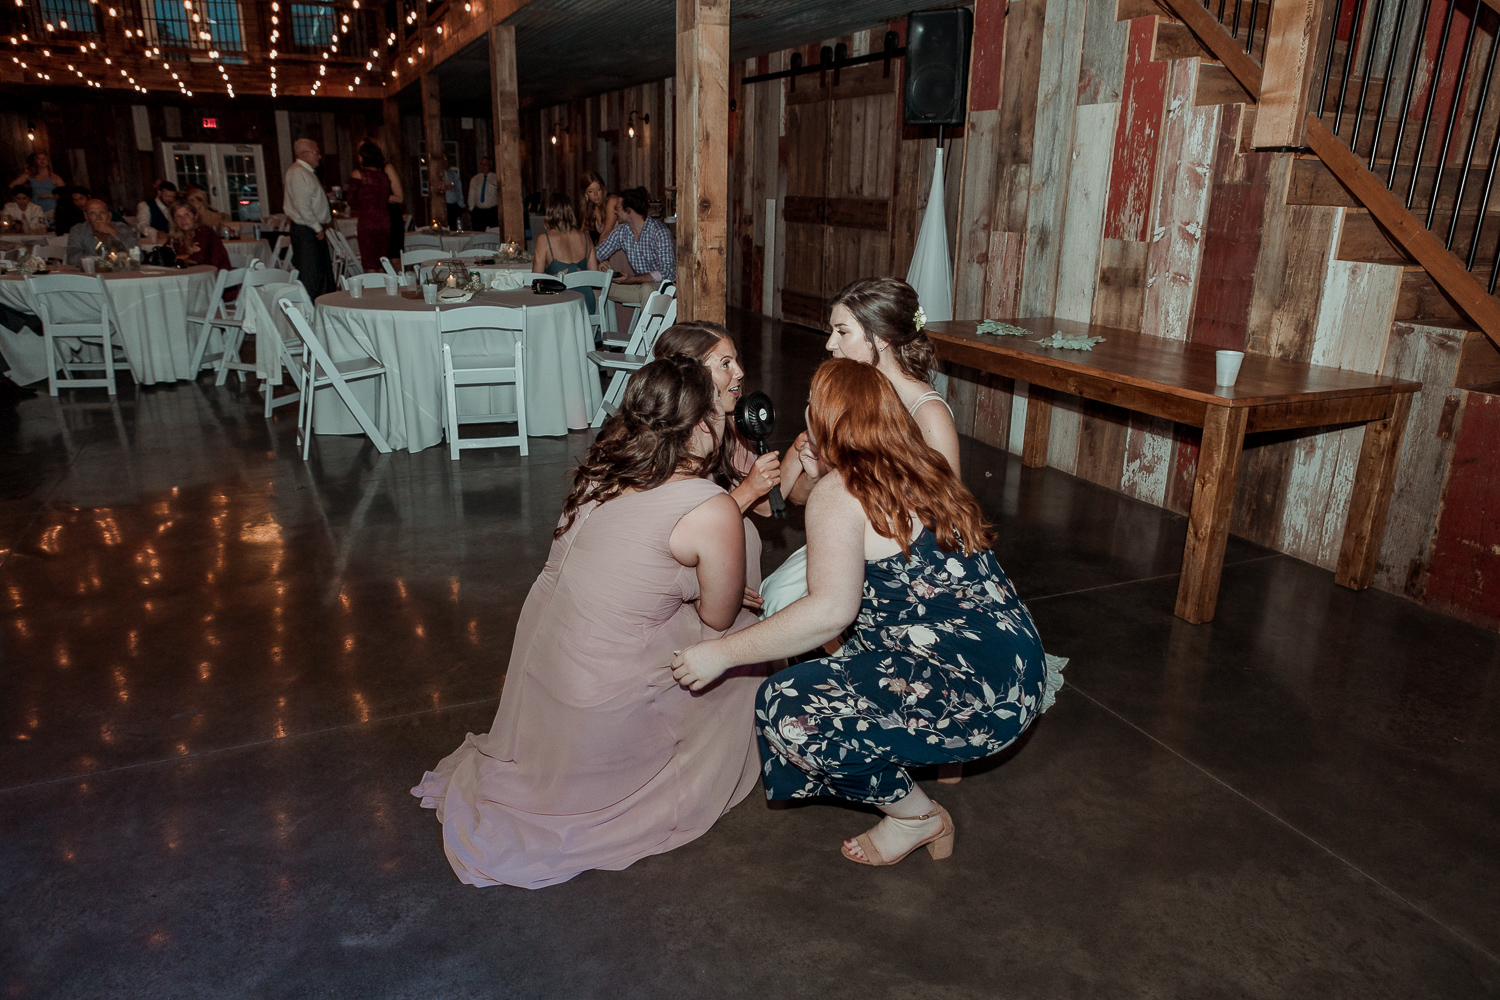 Red Acre Barn Wedding Pictures and Video, Prole, Iowa